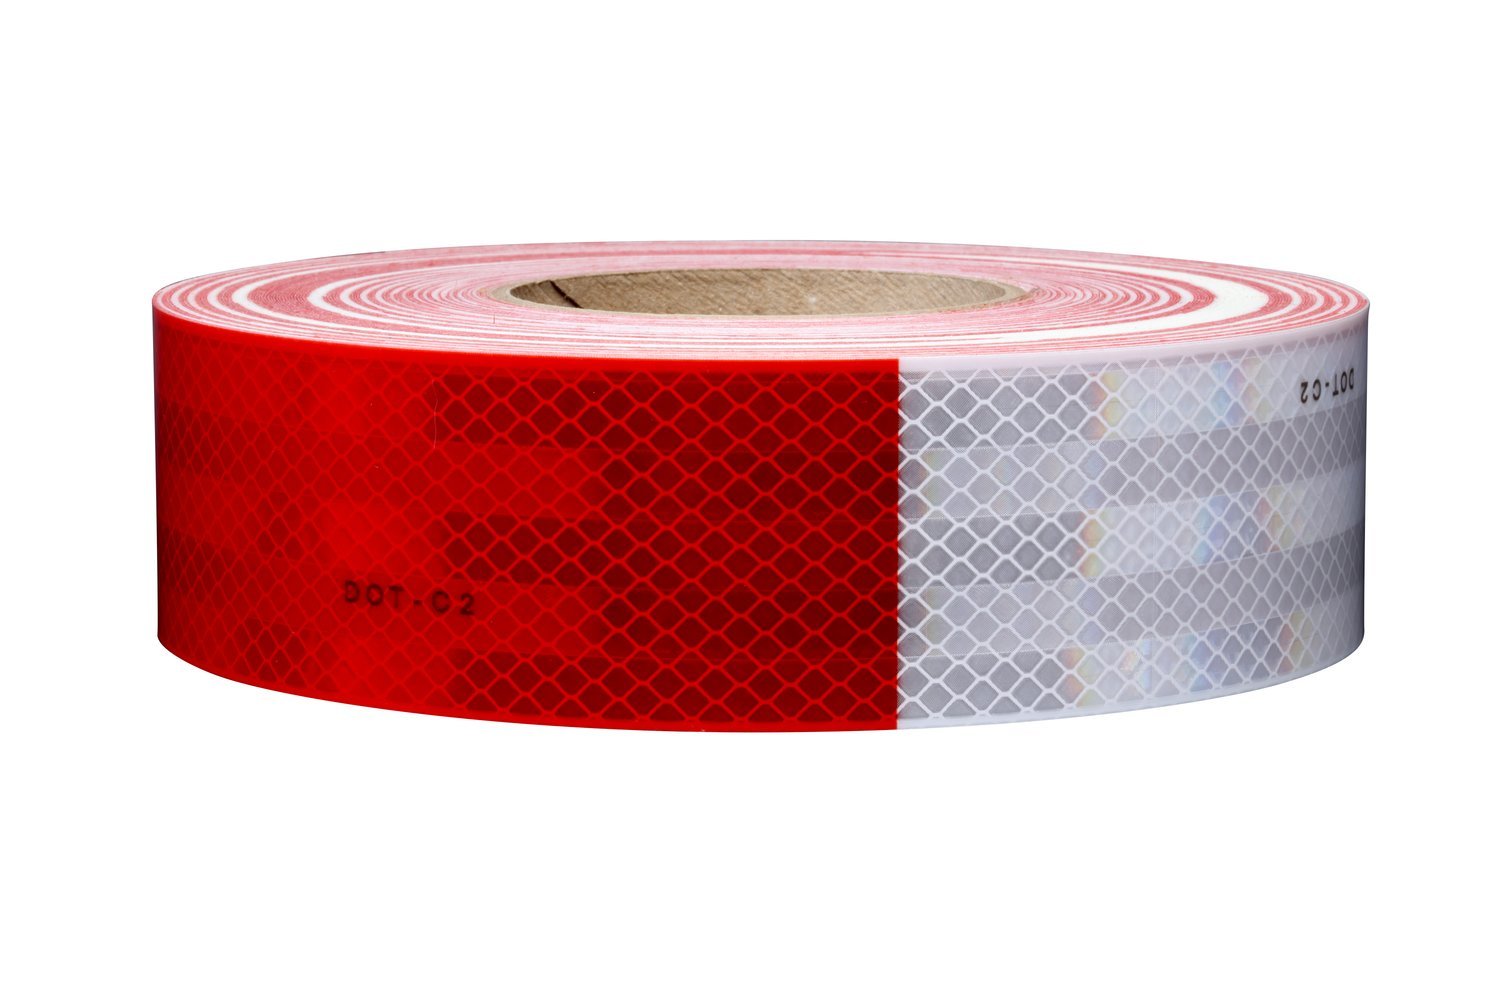 7010343757 - 3M Diamond Grade Conspicuity Marking 983-32, Red/White, 2 in x 50 yd,
Kiss Cut every 18 in, 6 Rolls/Carton